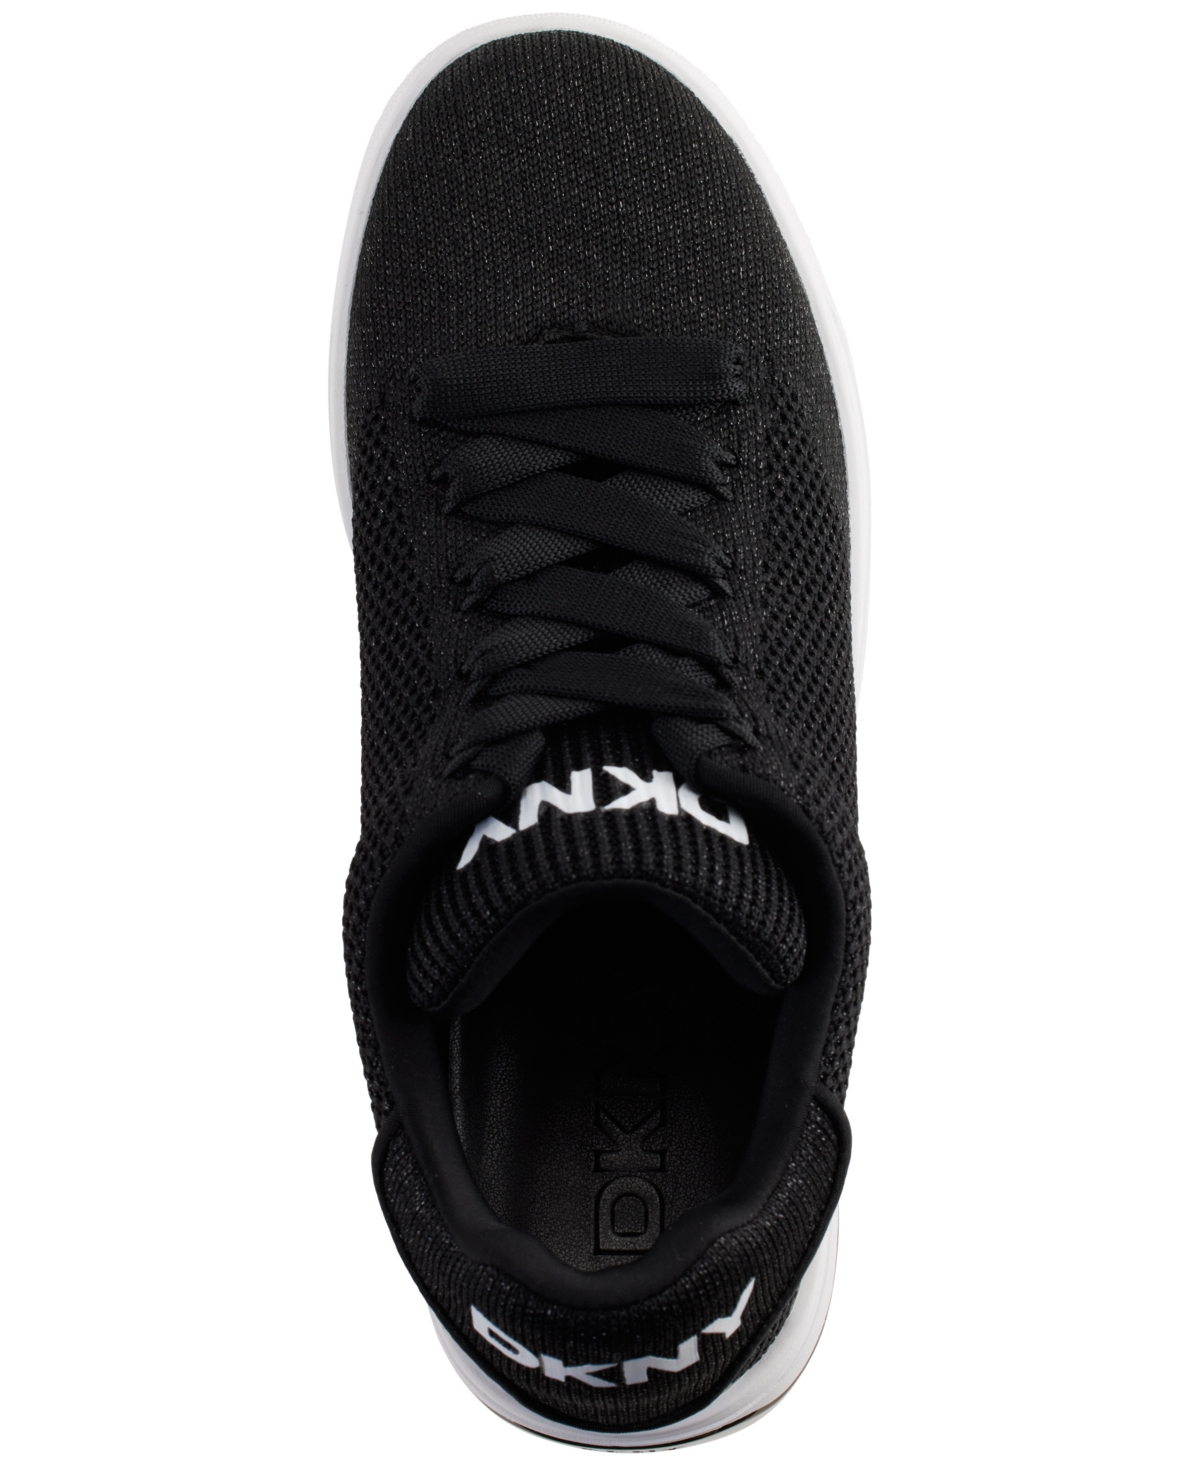 Shop Dkny Women's Abeni Lace-up Low-top Sneakers In Black